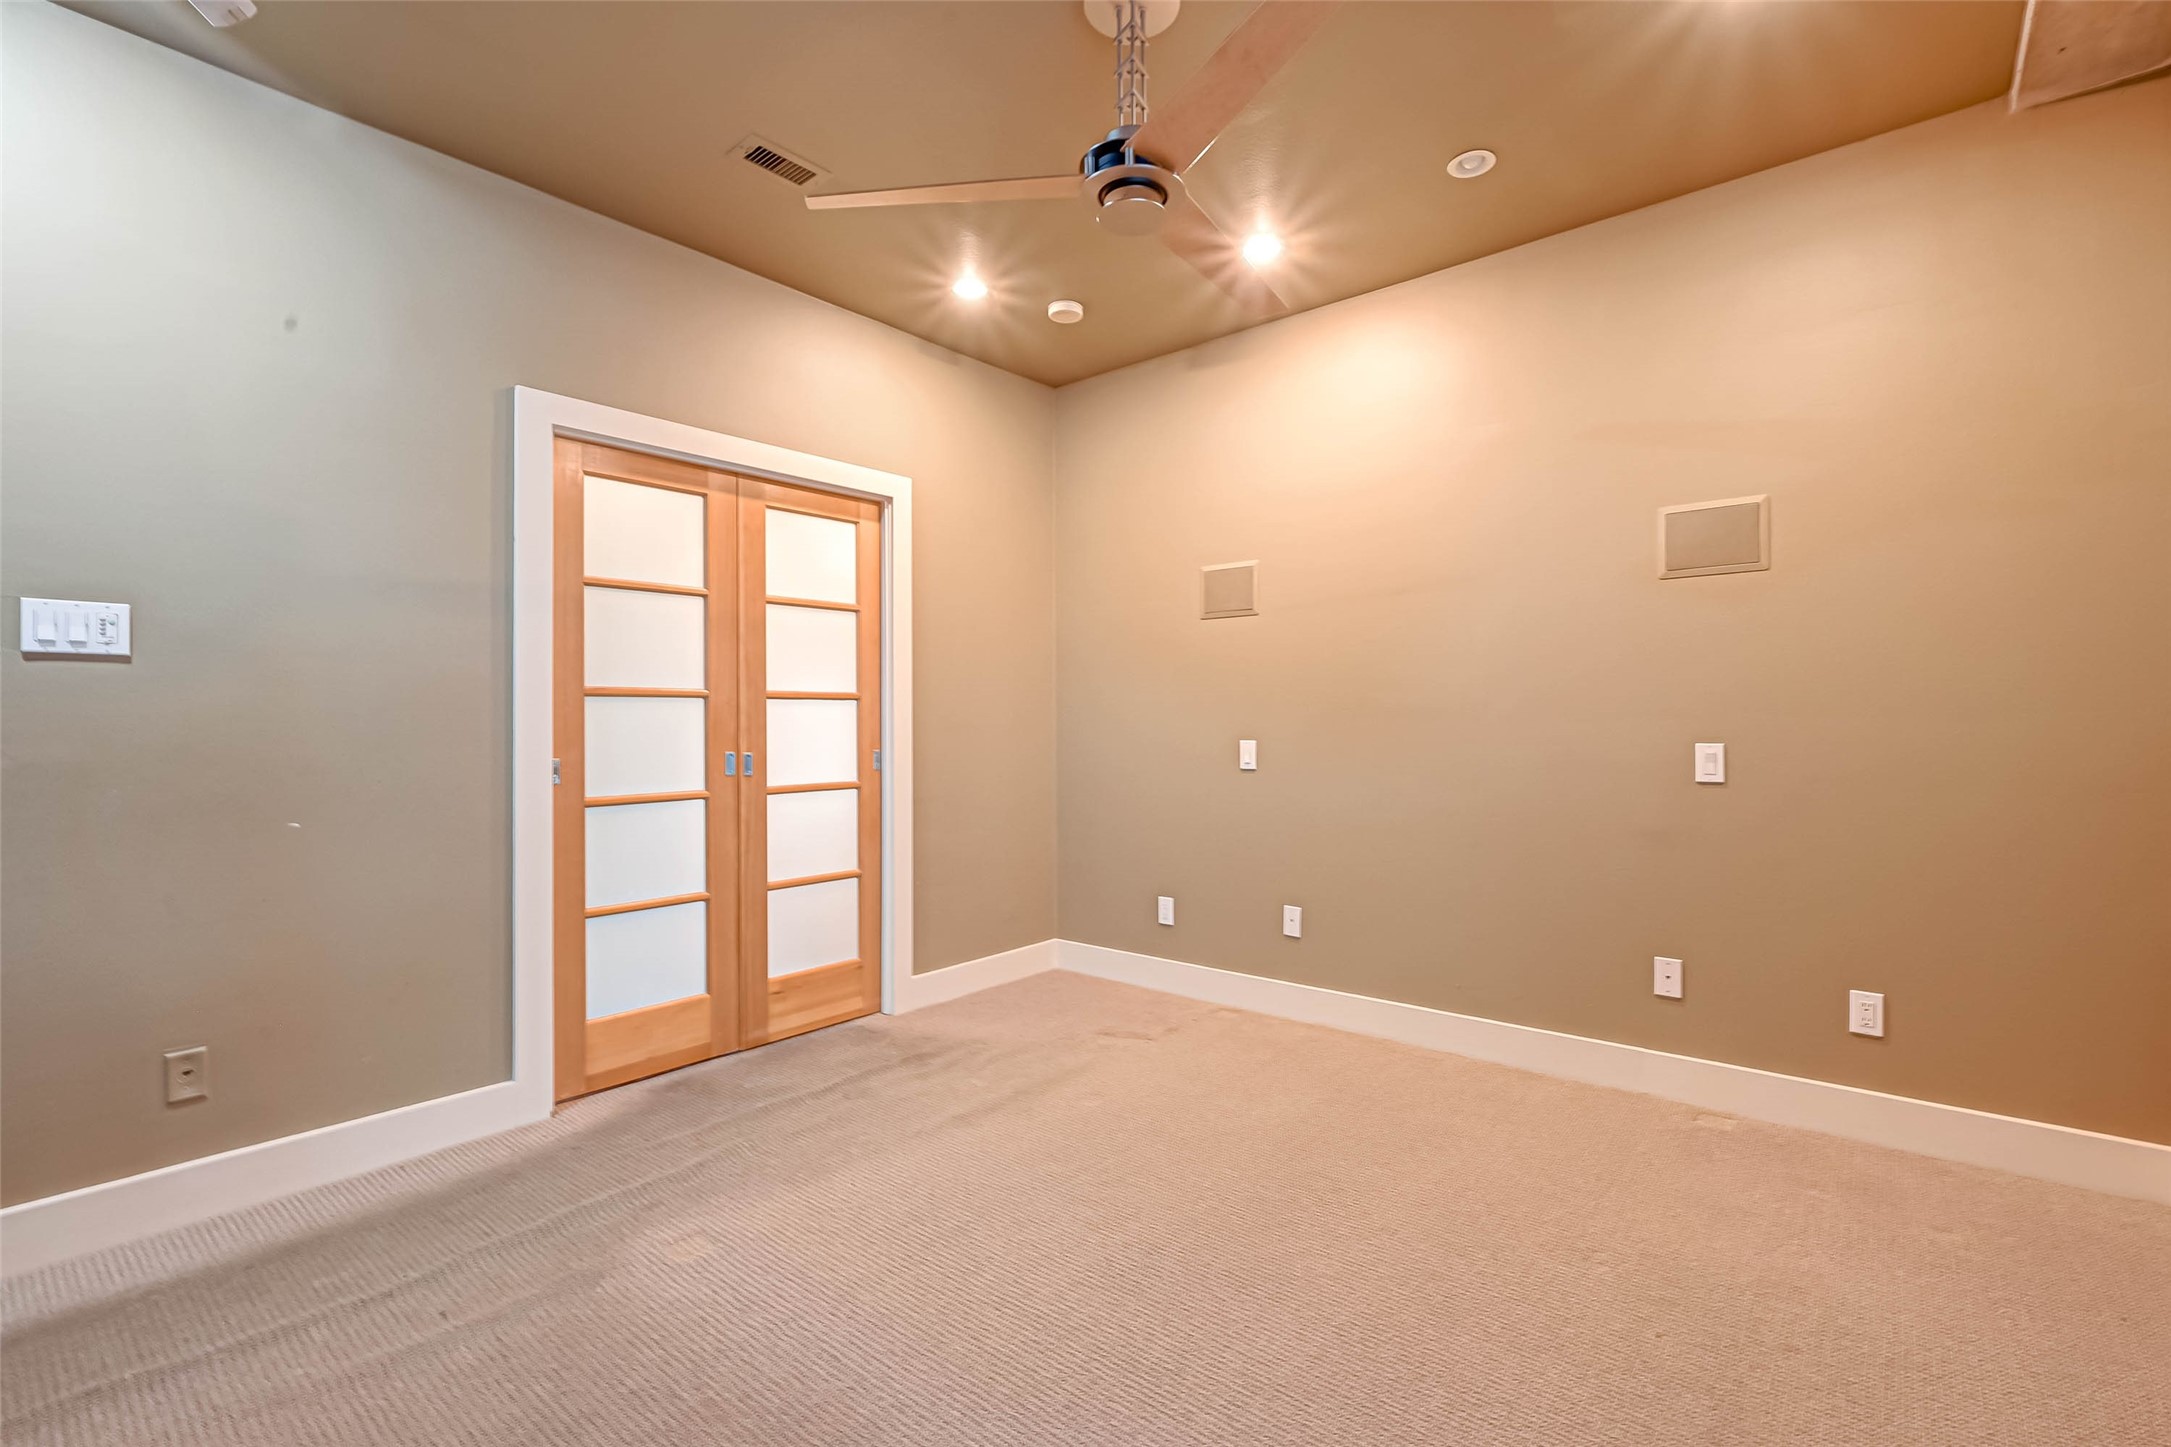 Double pocket doors for privacy.